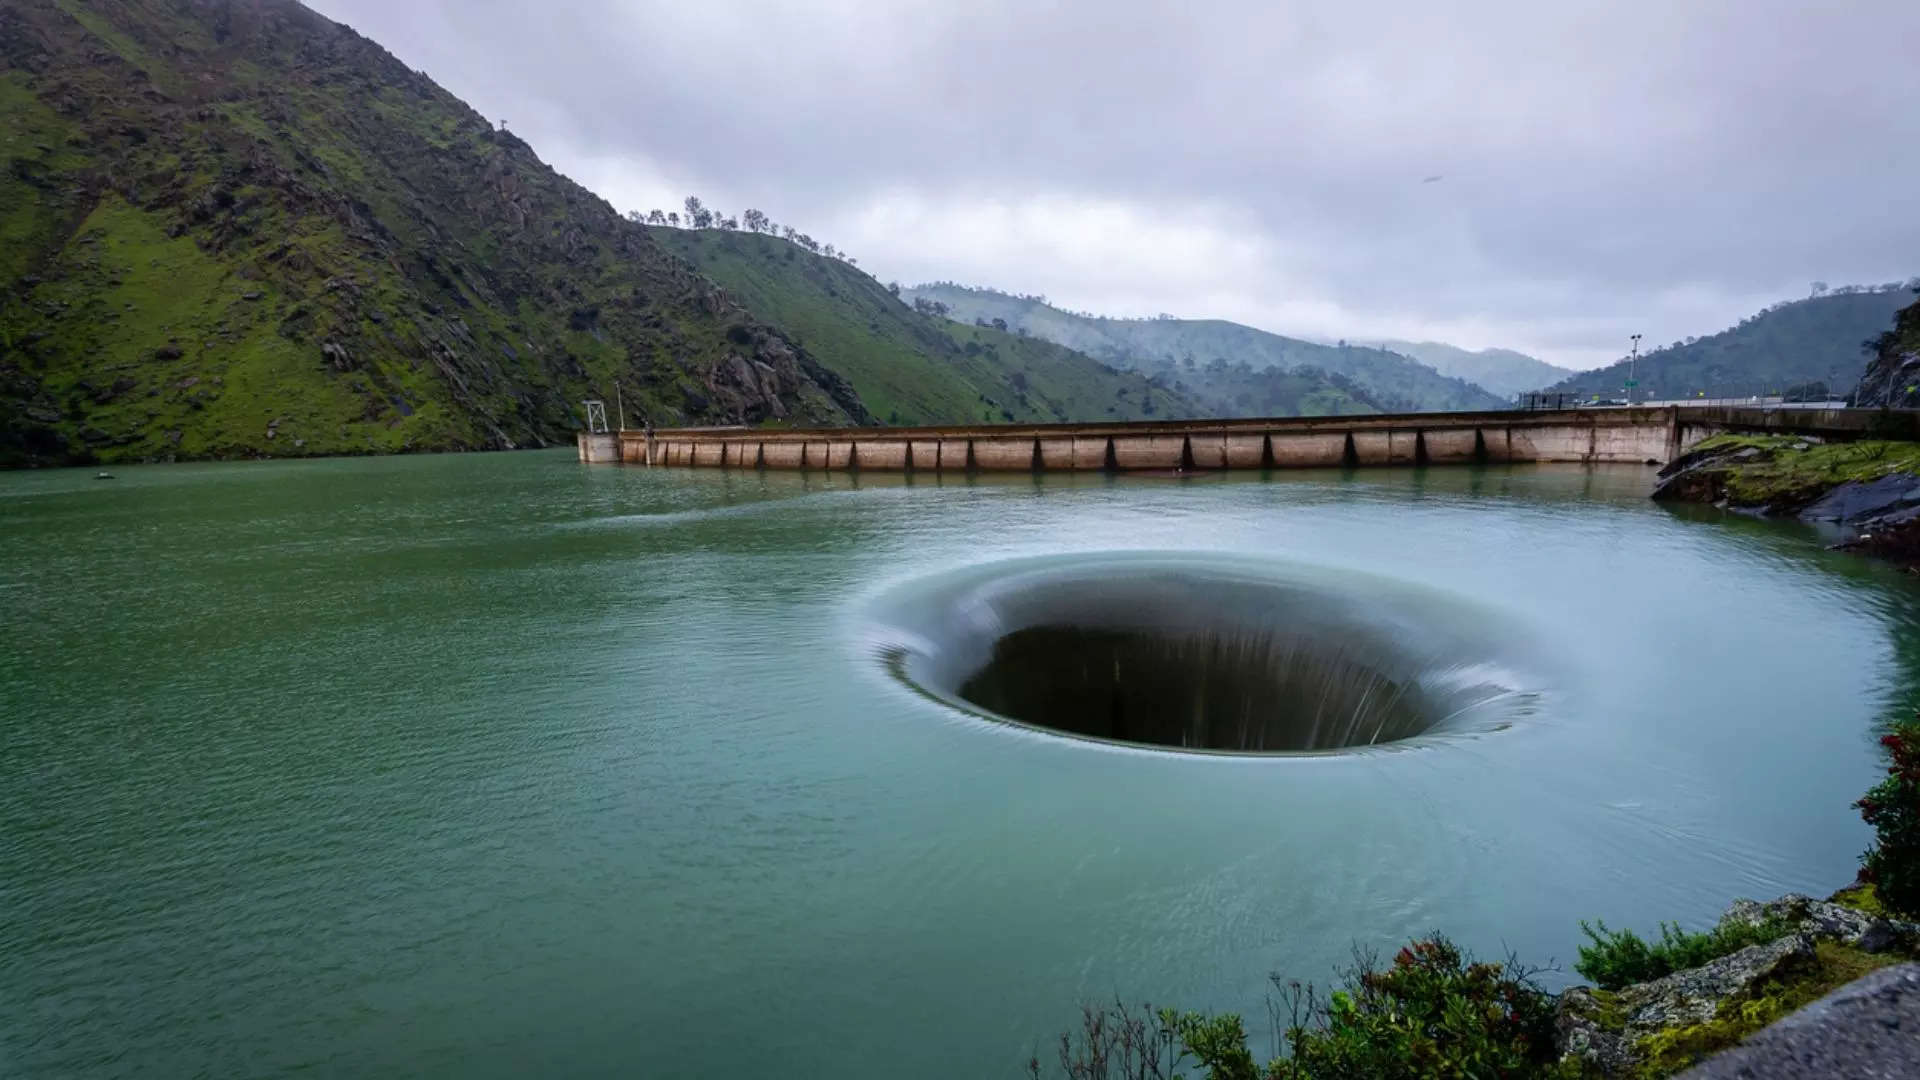 The 72-ft-wide and 245-ft-long spillway is fondly called by the locals as the 'Glory Hole '